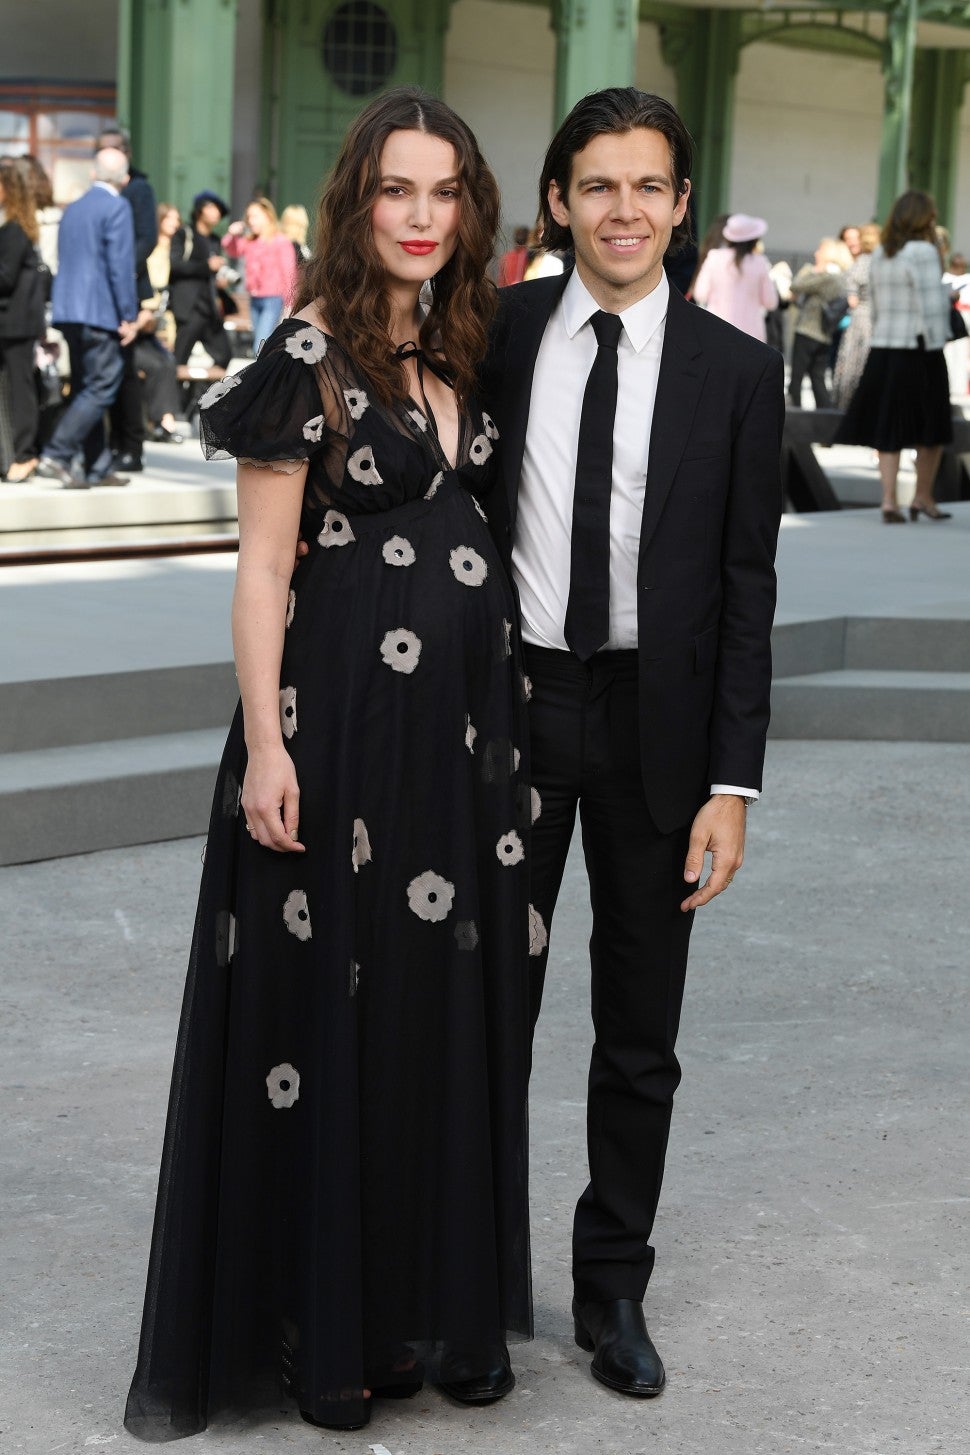 Keira Knightley pregnant at Chanel cruise 2020 show with James Righton